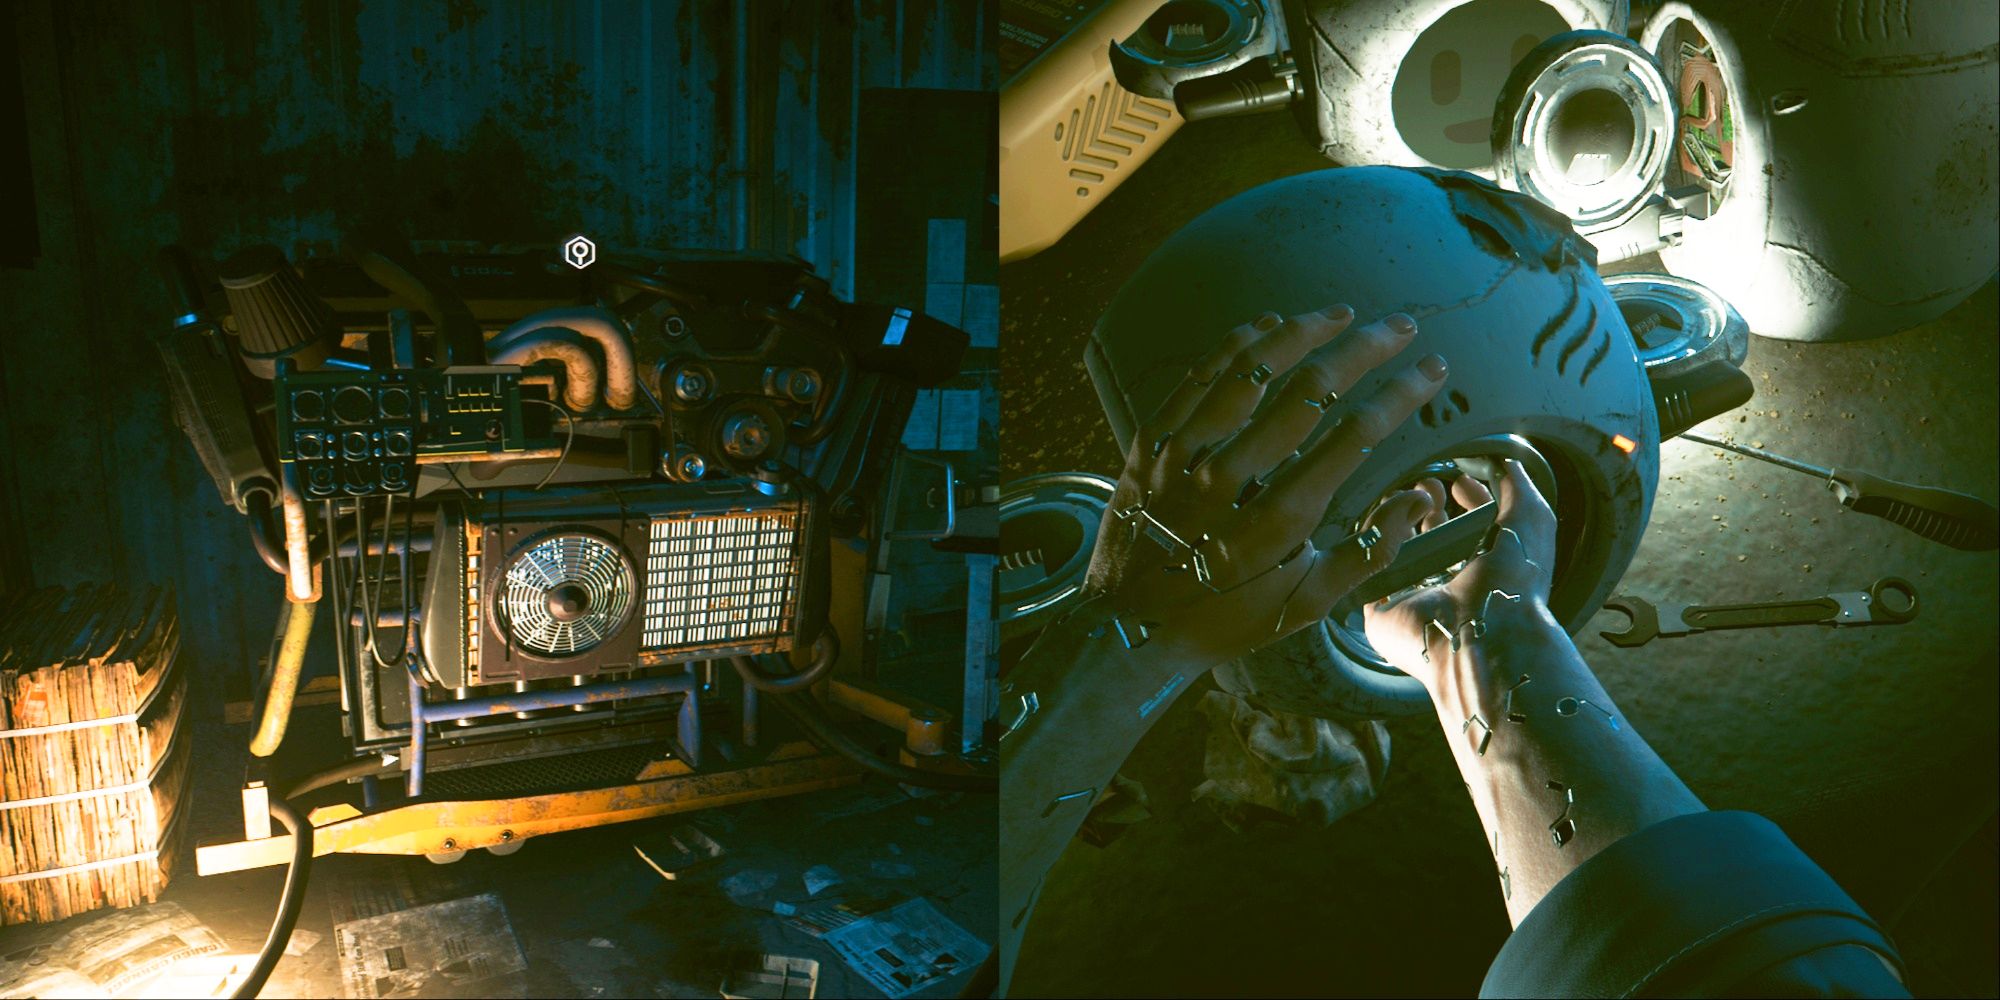 Cyberpunk 2077 Phantom Liberty Restore Power In Abandoned Apartment Featured Split Image Of Generator and Drone